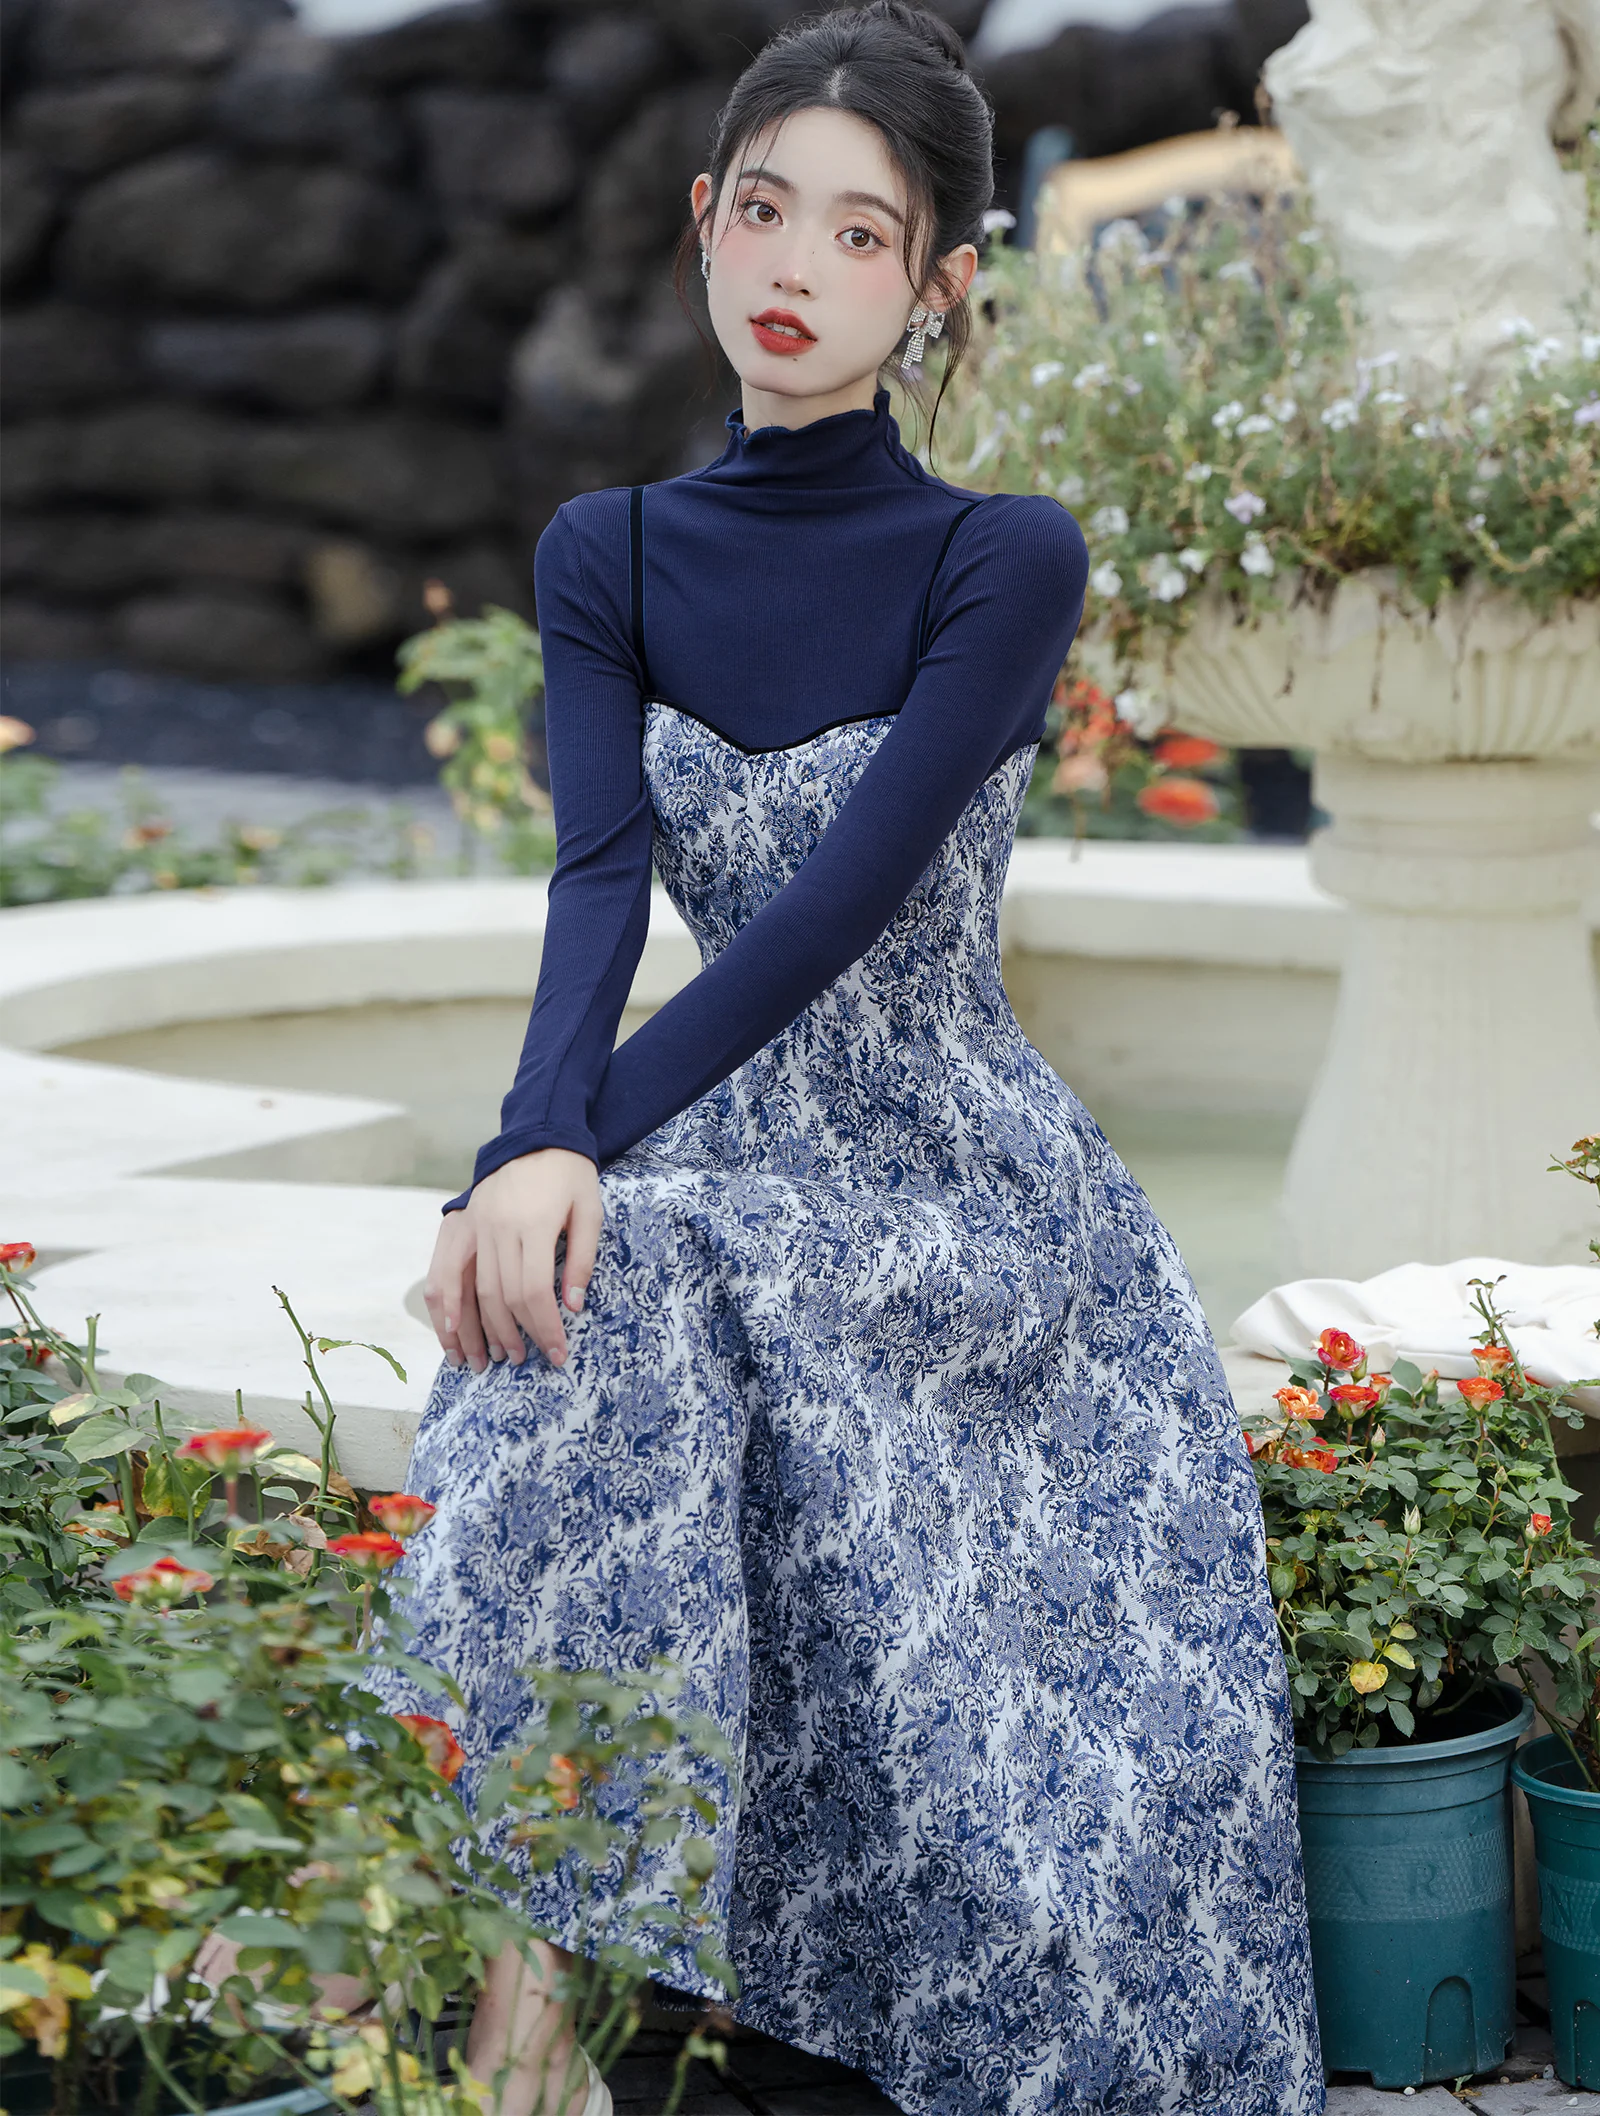 Sweet Blue Turtleneck Knit Sweater with Thick Floral Slip Dress Suit03